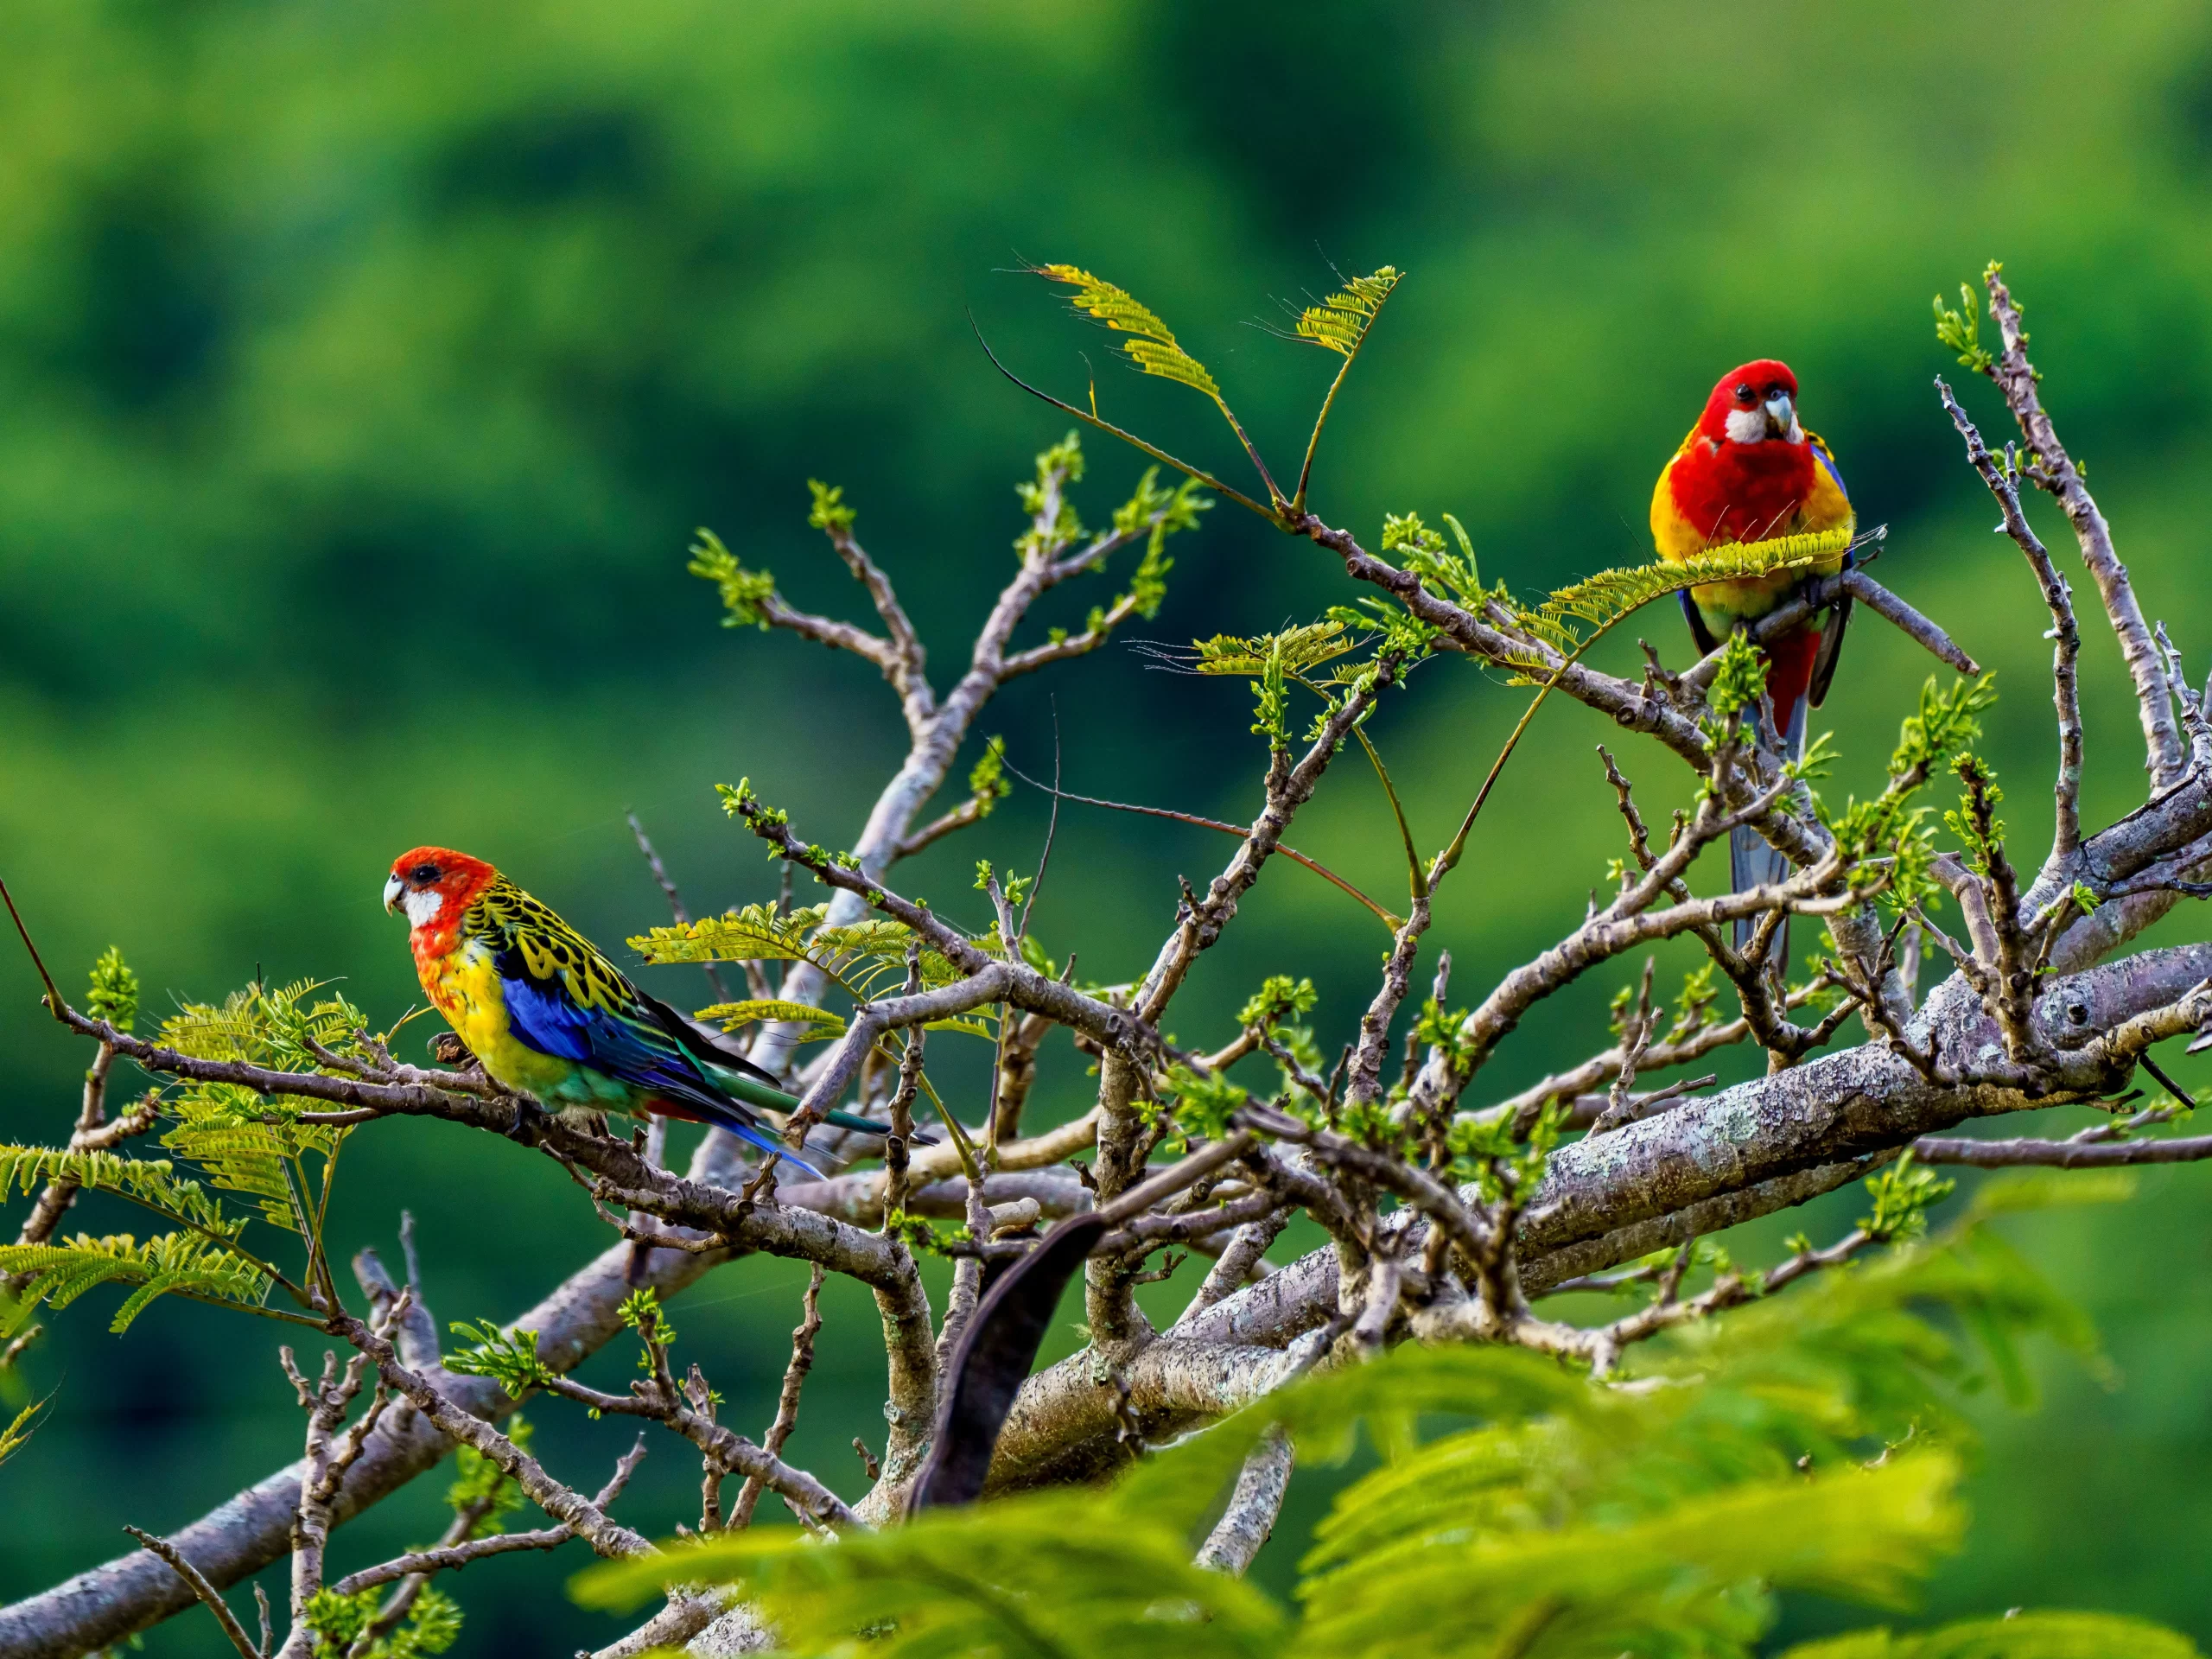 A pair of Eastern Rosellas sit in a tree. There are 6 types of Rosellas in Australia.